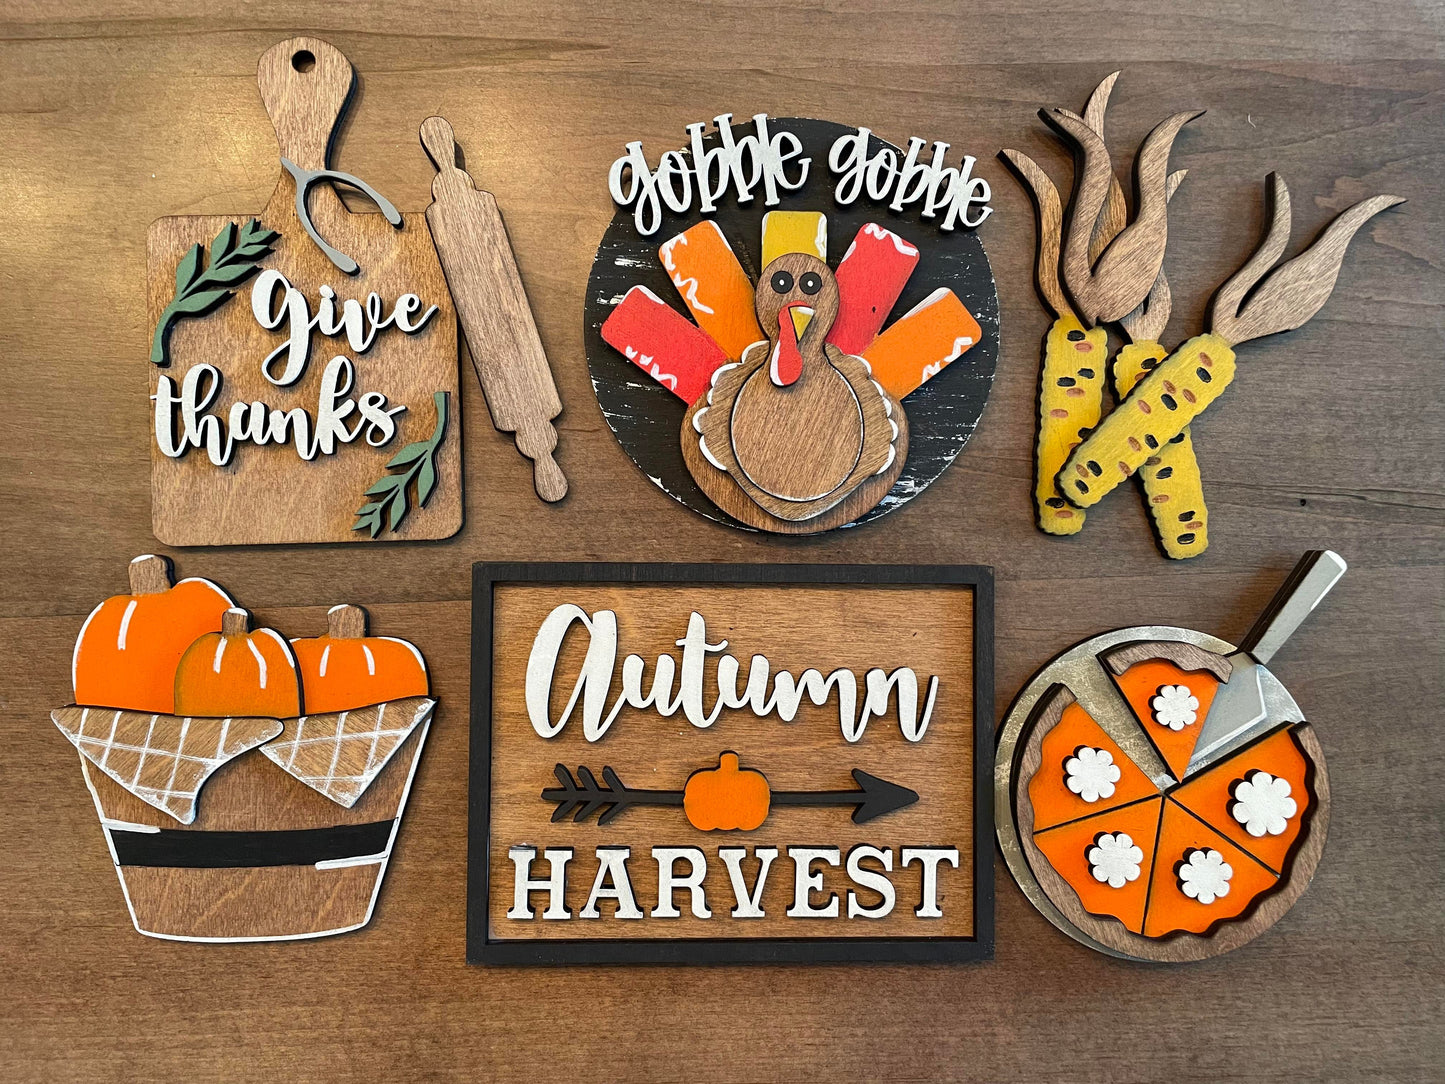 3D Tiered Tray Decor - Thanksgiving/Harvest